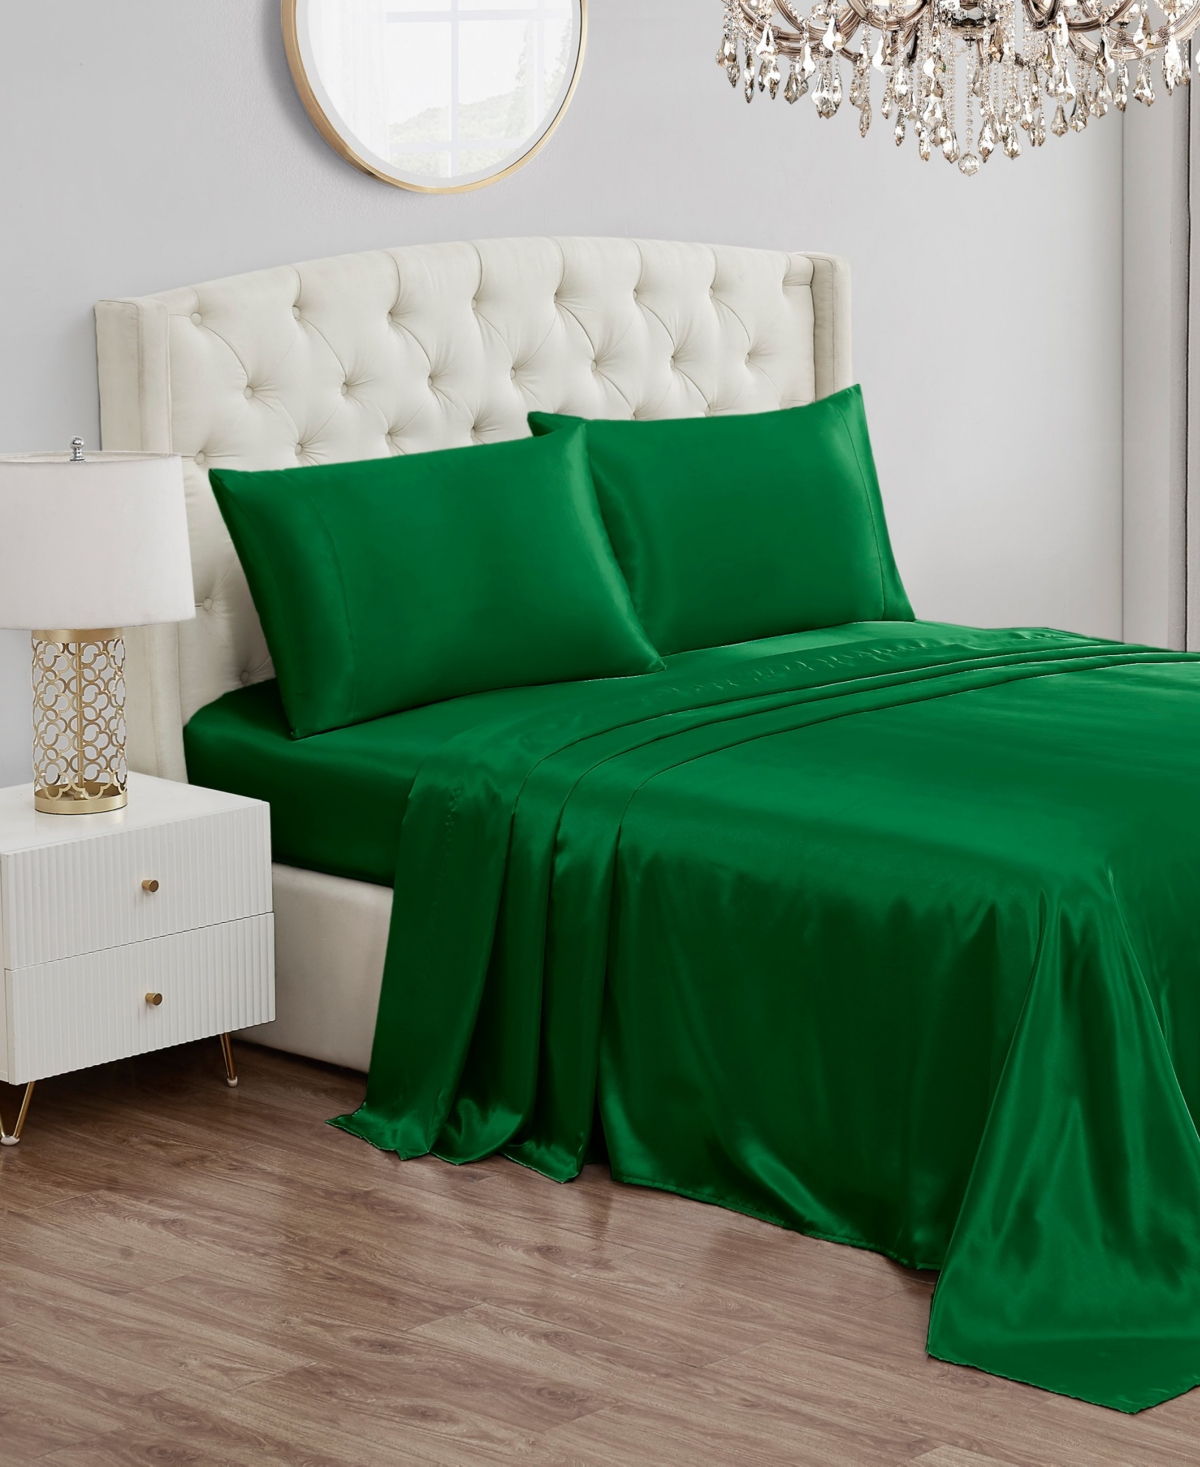 Juicy Couture Satin 4 Piece Sheet Set, Full In Green